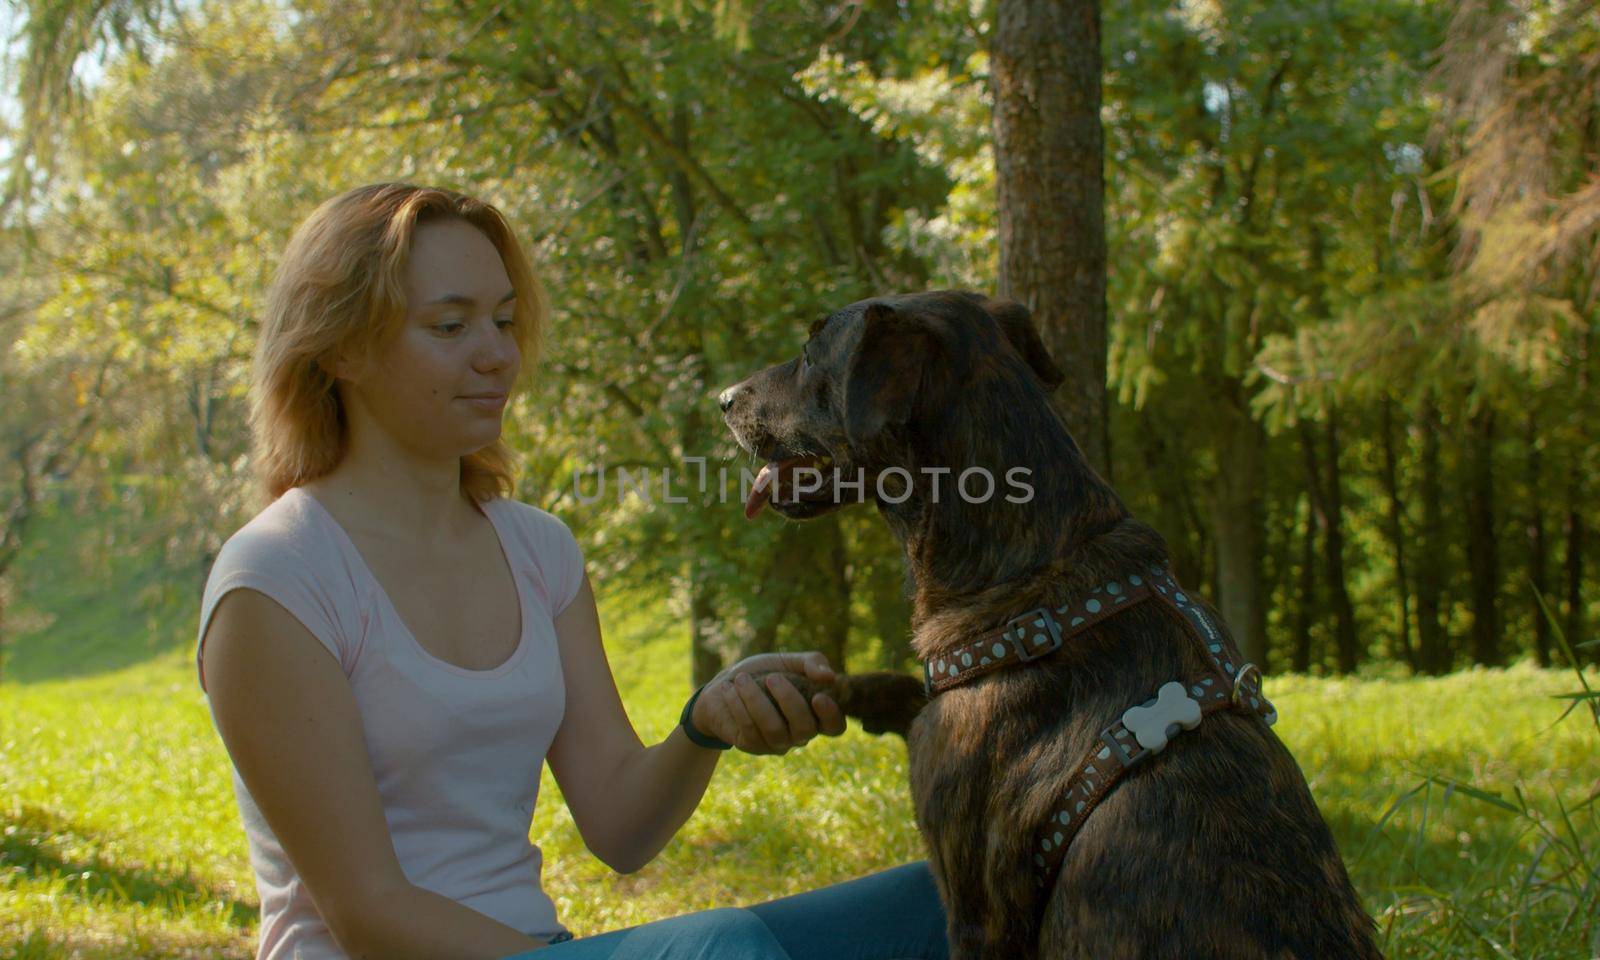 Friendly handshake. Young attractive lady and her dog on the stroll in the park.